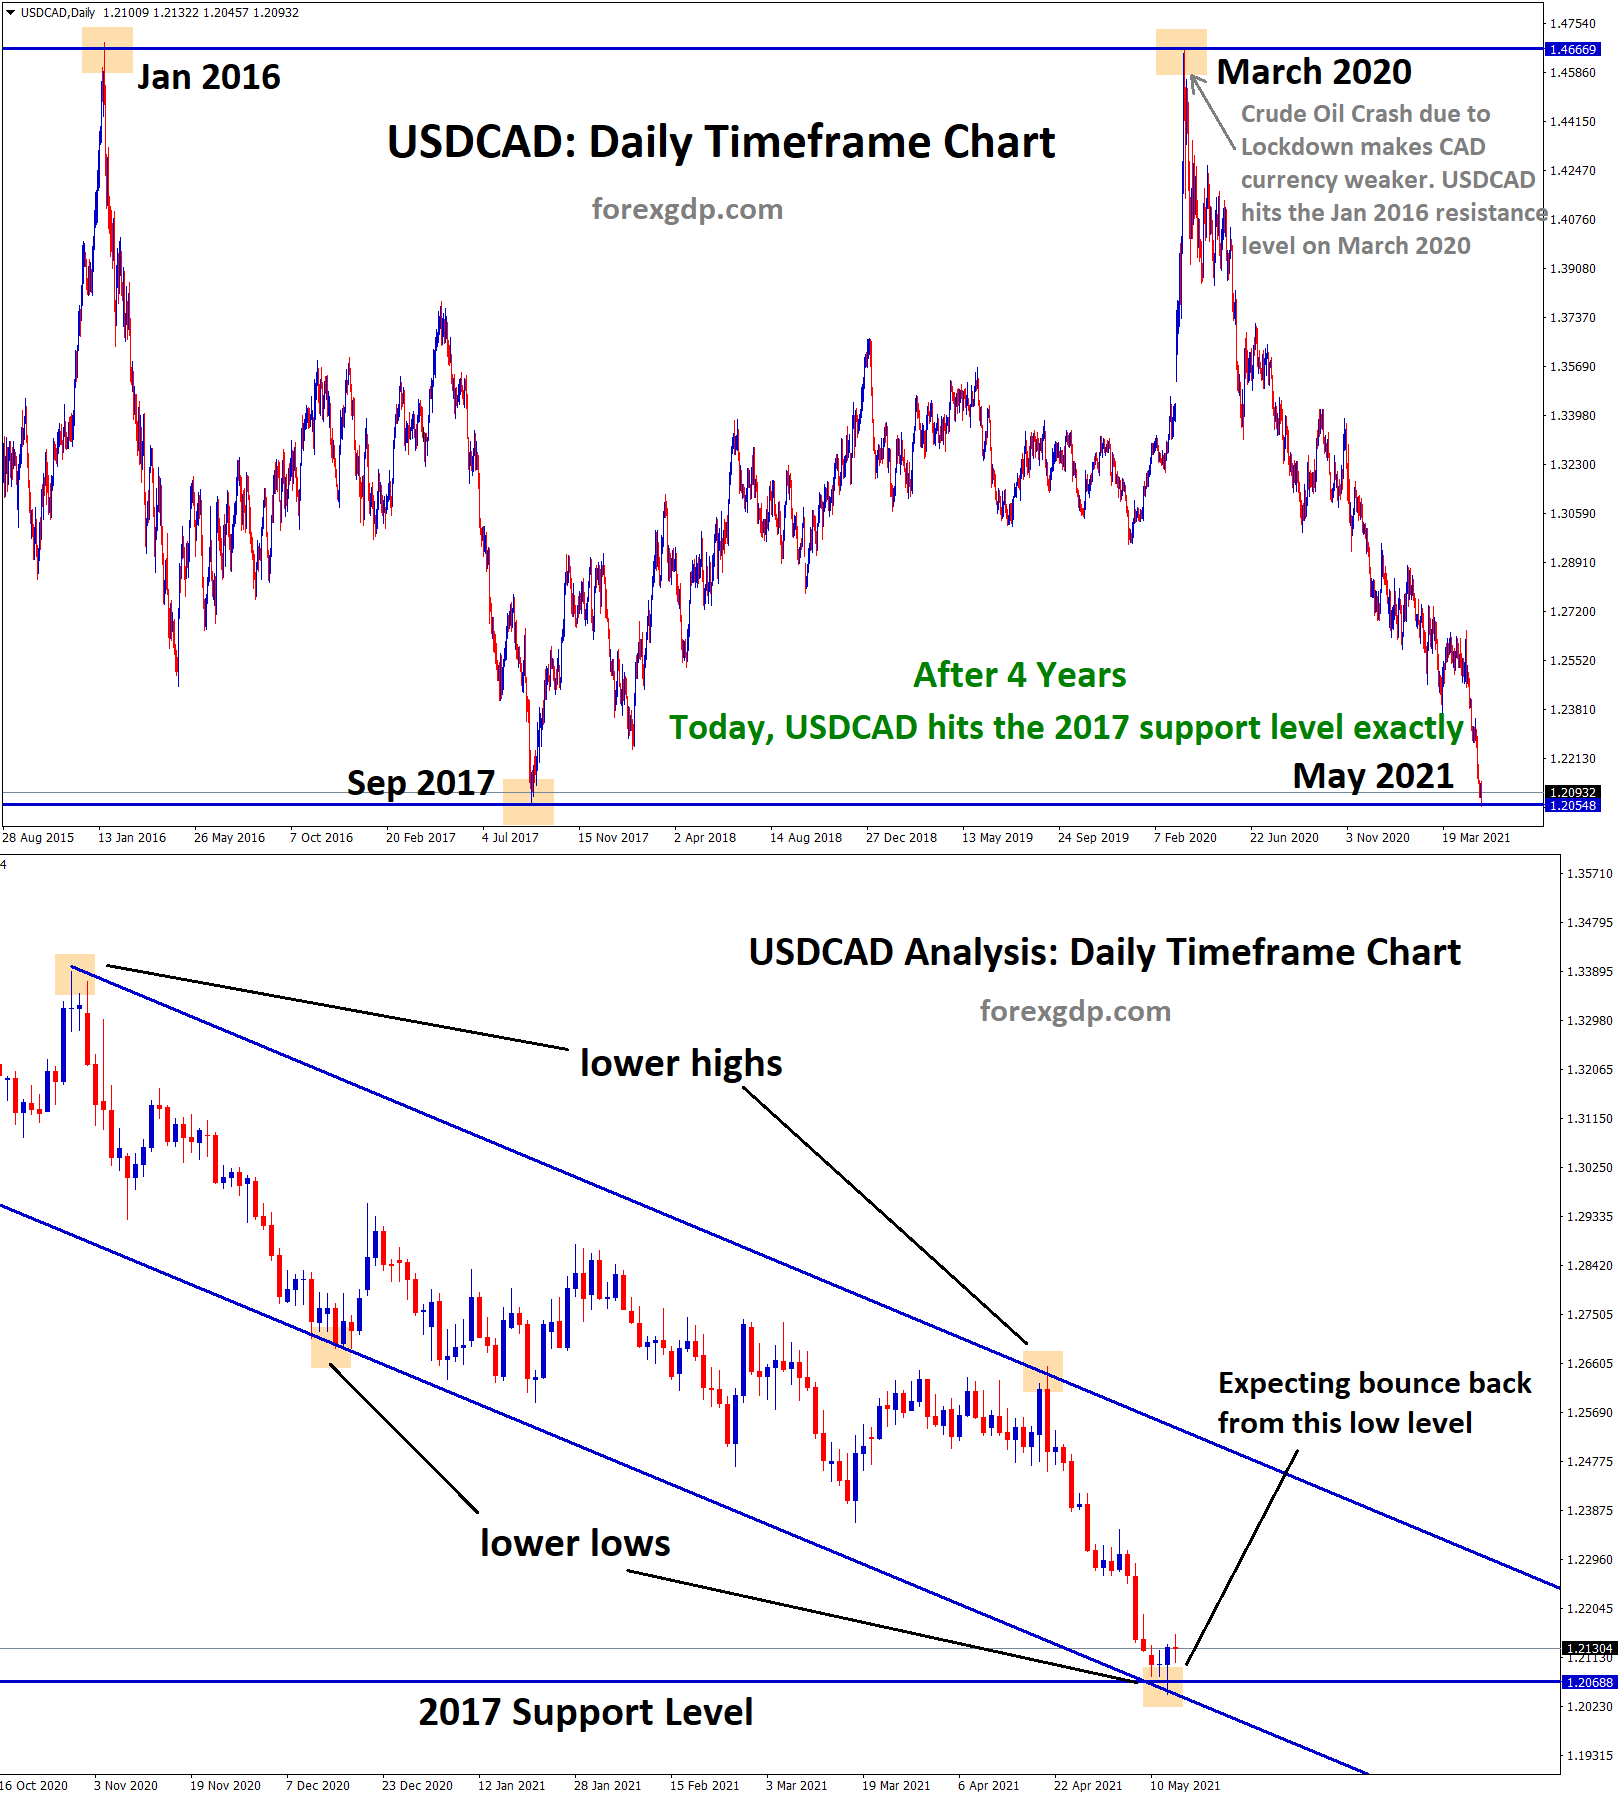 USDCAD hits the 2017 support level exactly and bounce back from lower low of downtrend line